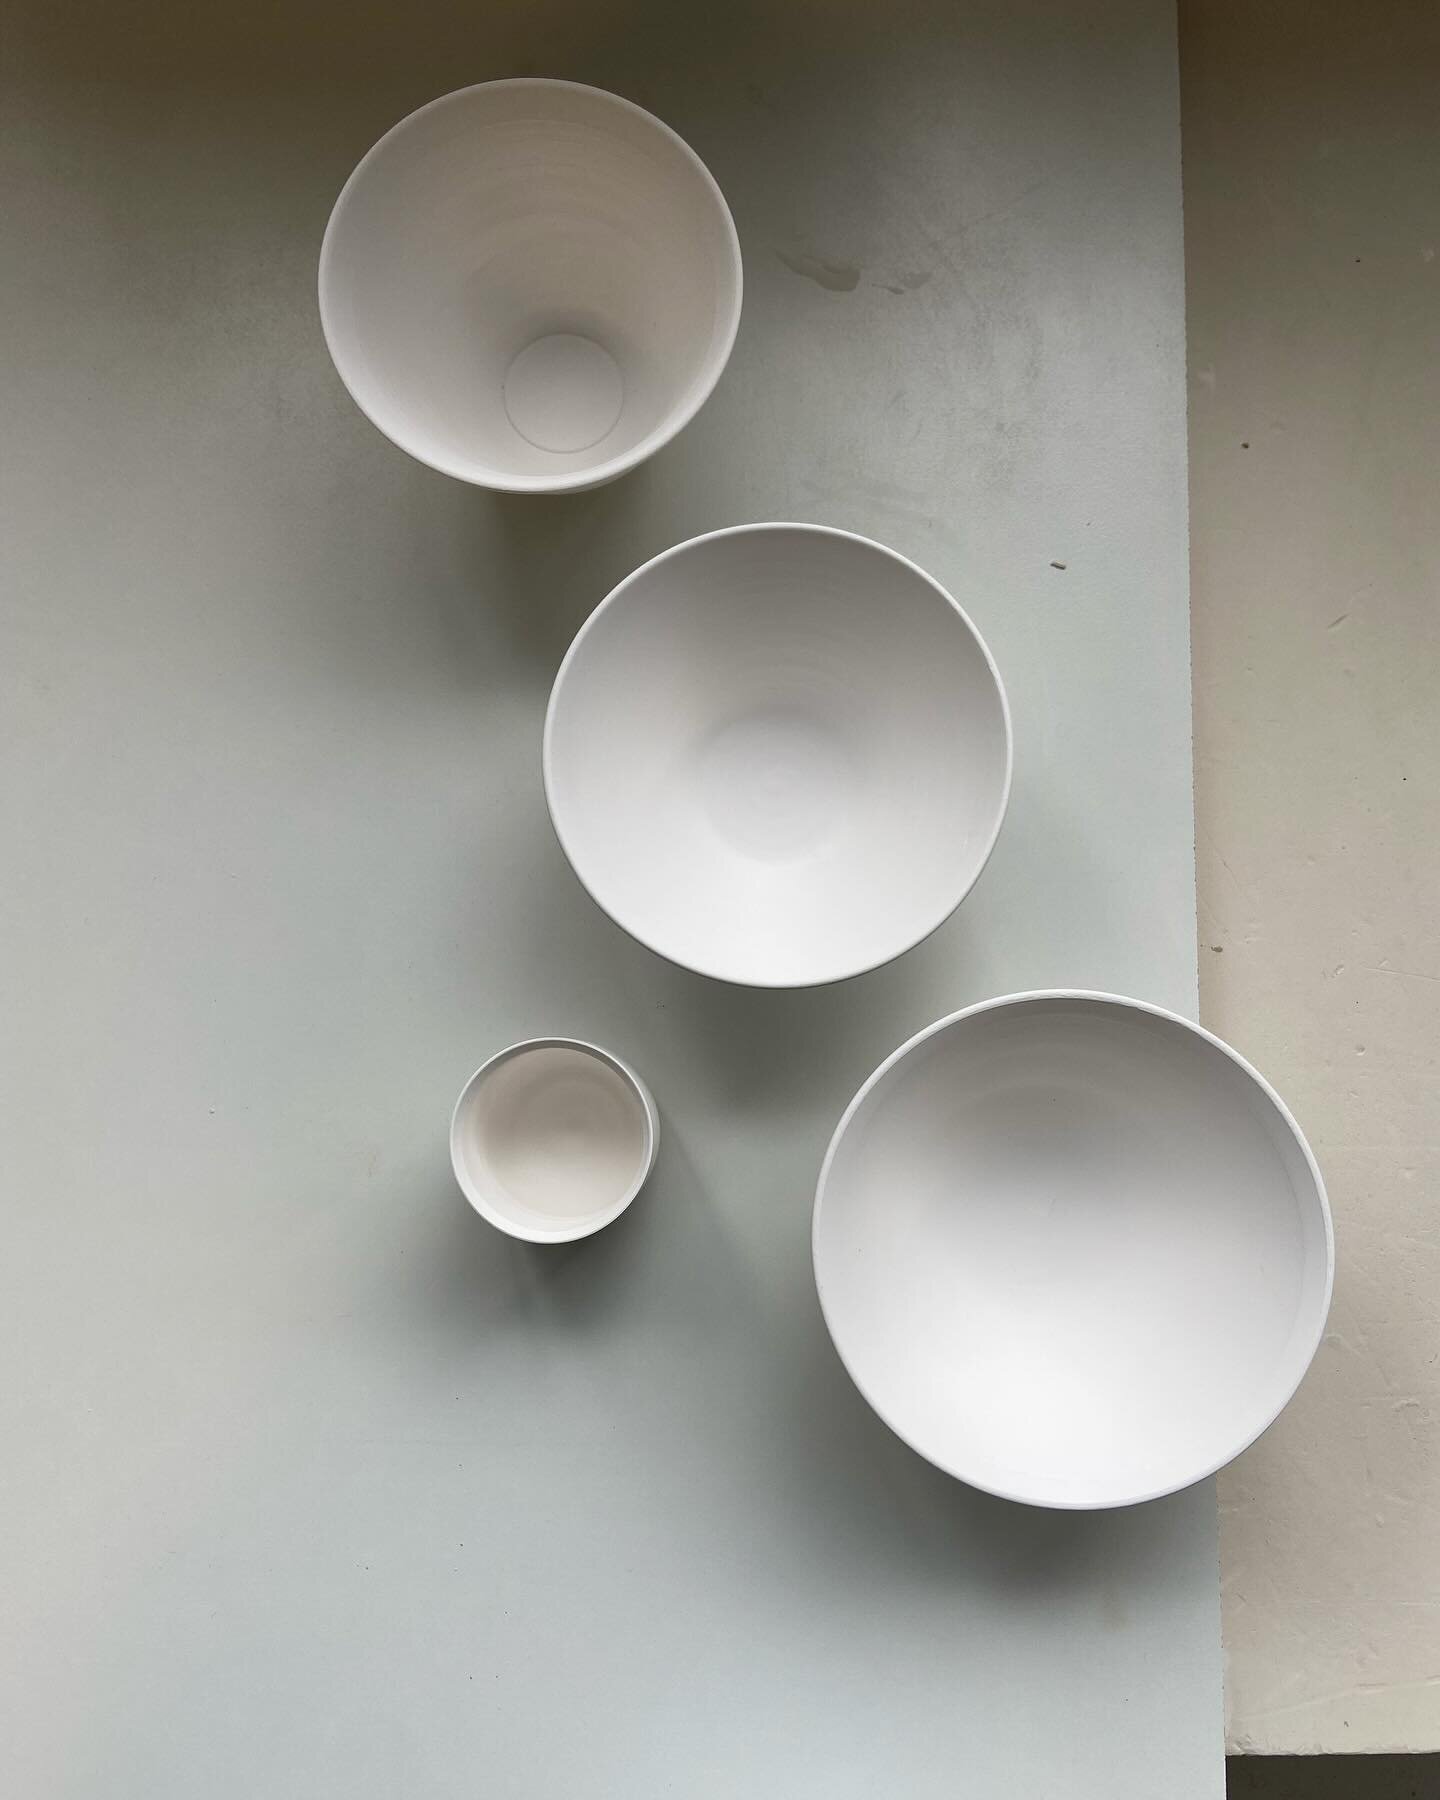 Bisc porcelain from the kiln. All in anticipation of a glaze finish. Gloss, celadon? Matte, satin?

These are three types of porcelain I currently use. Two of them were kept for so long I had to reclaim them, but with a new trick learned recently it 